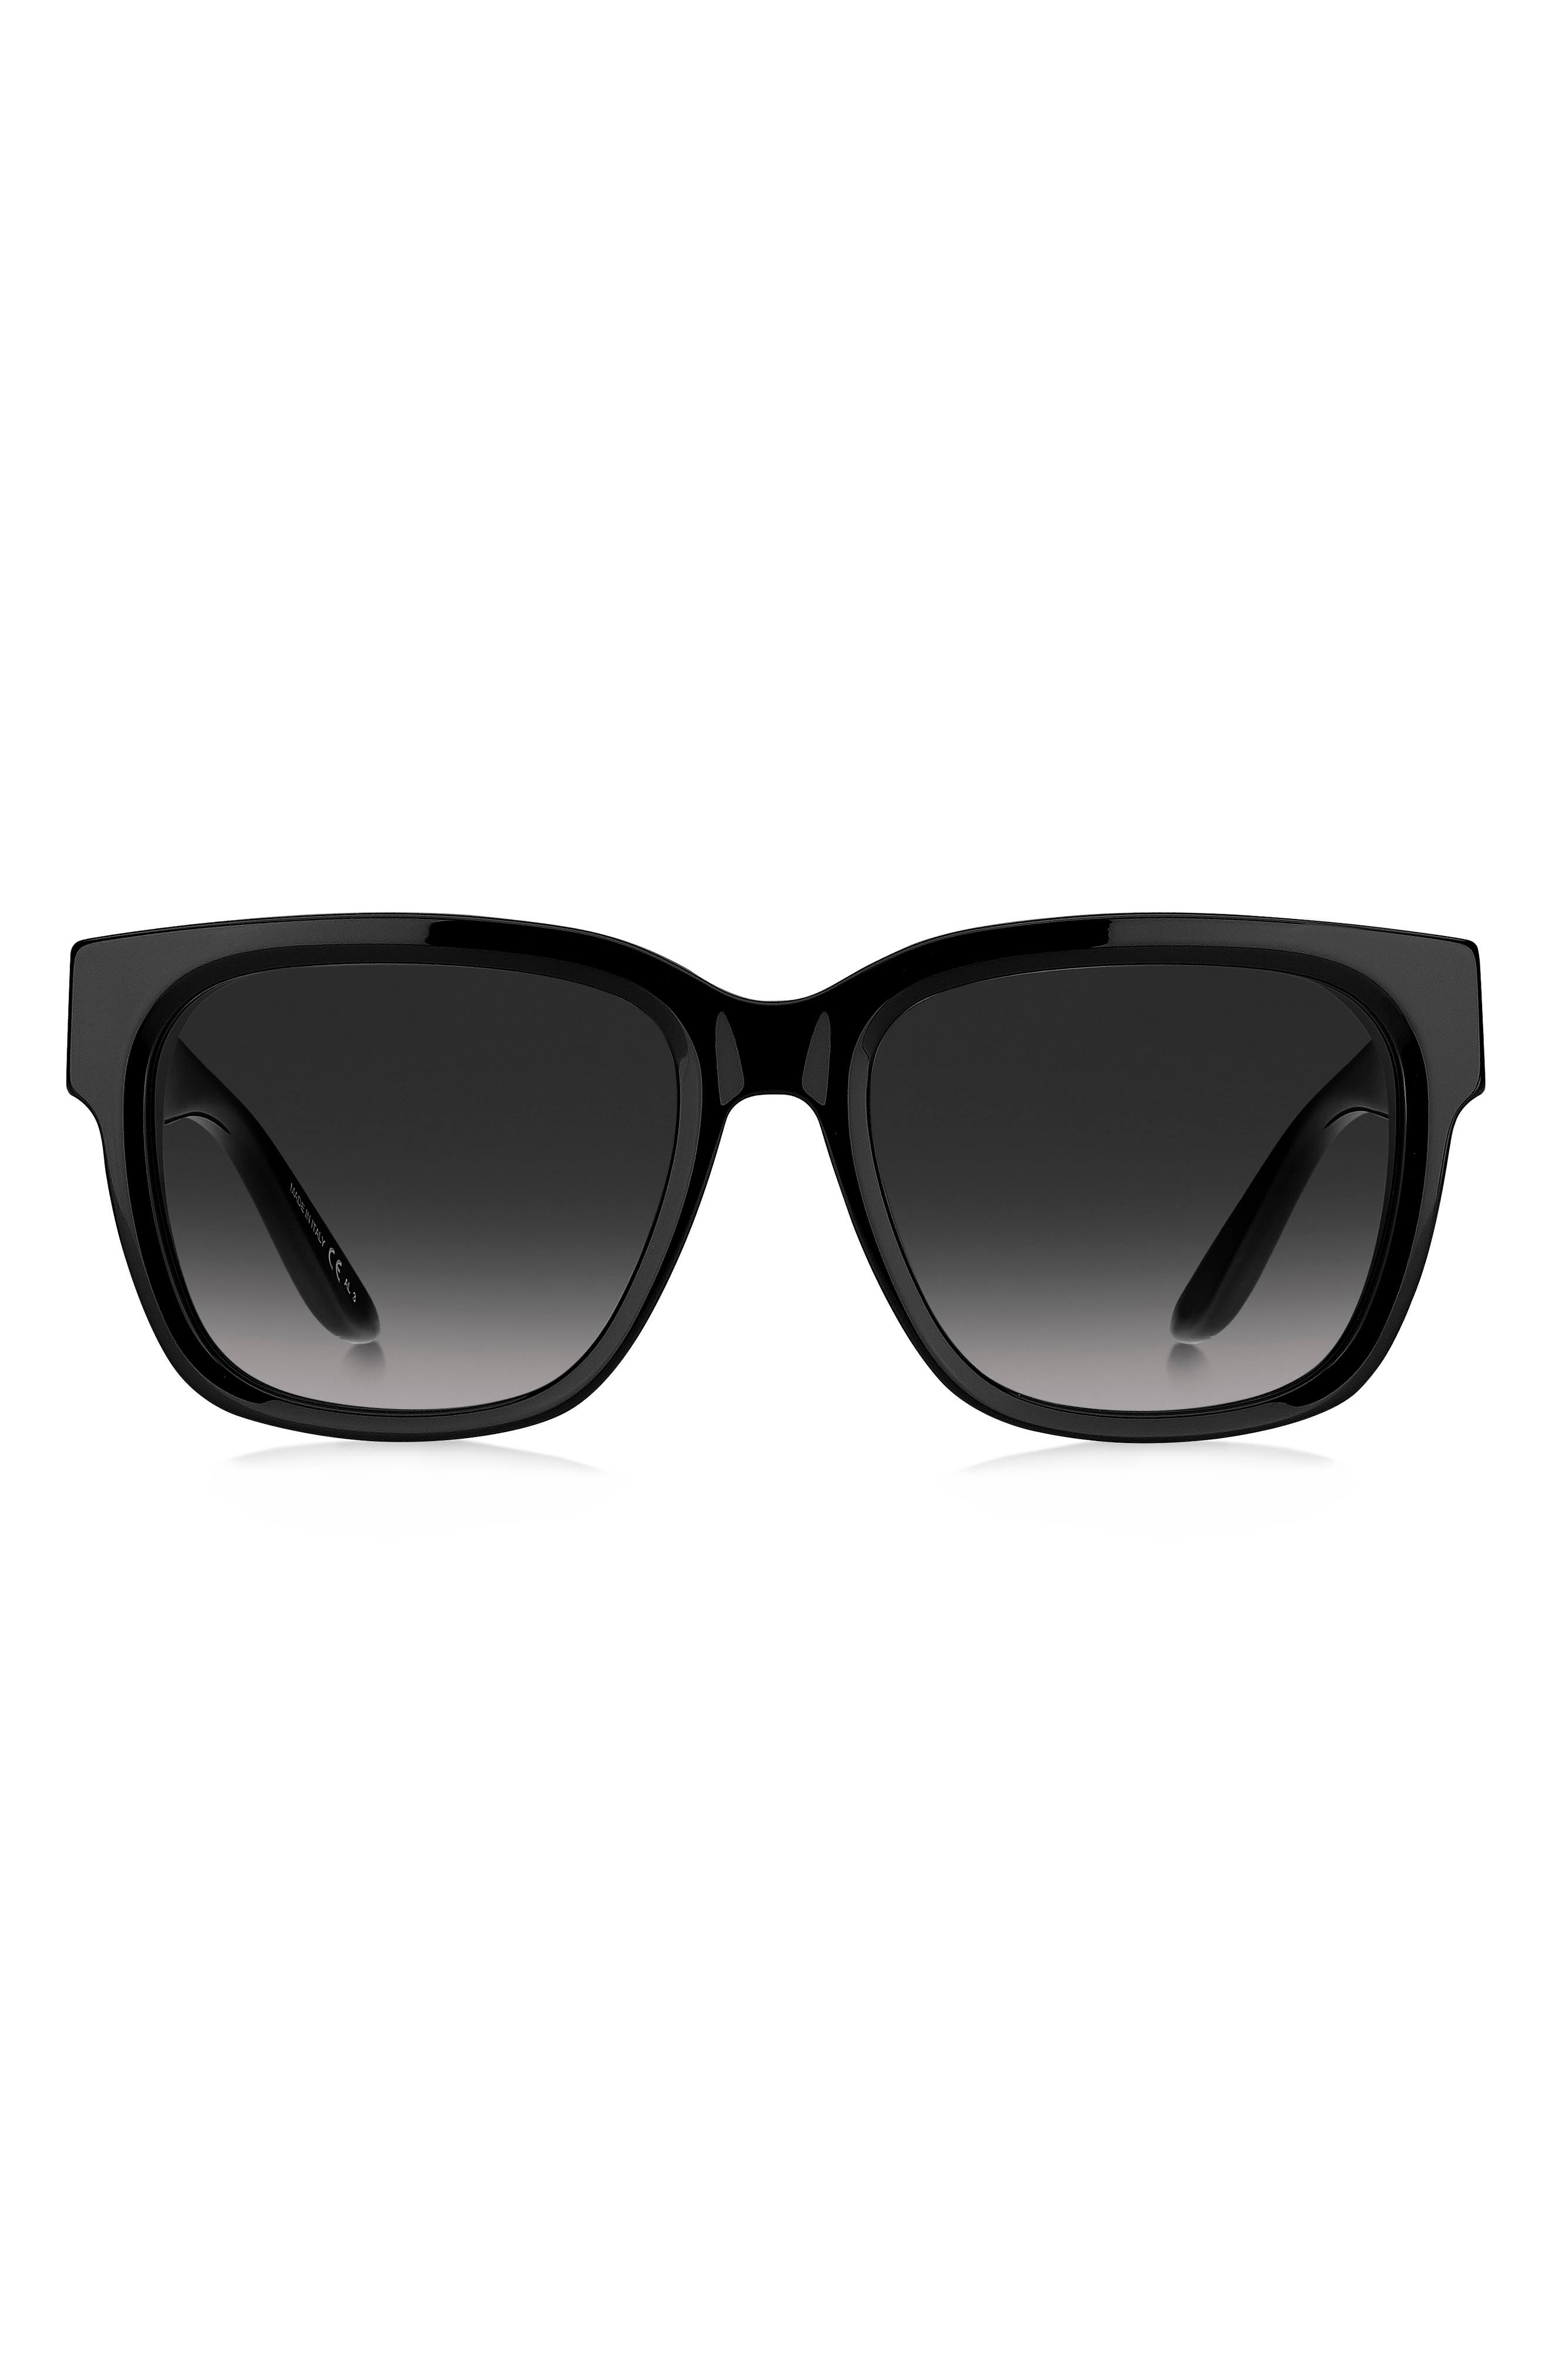 UPC 716736445465 product image for Givenchy 56mm Square Sunglasses in Black /Grey Shaded at Nordstrom | upcitemdb.com